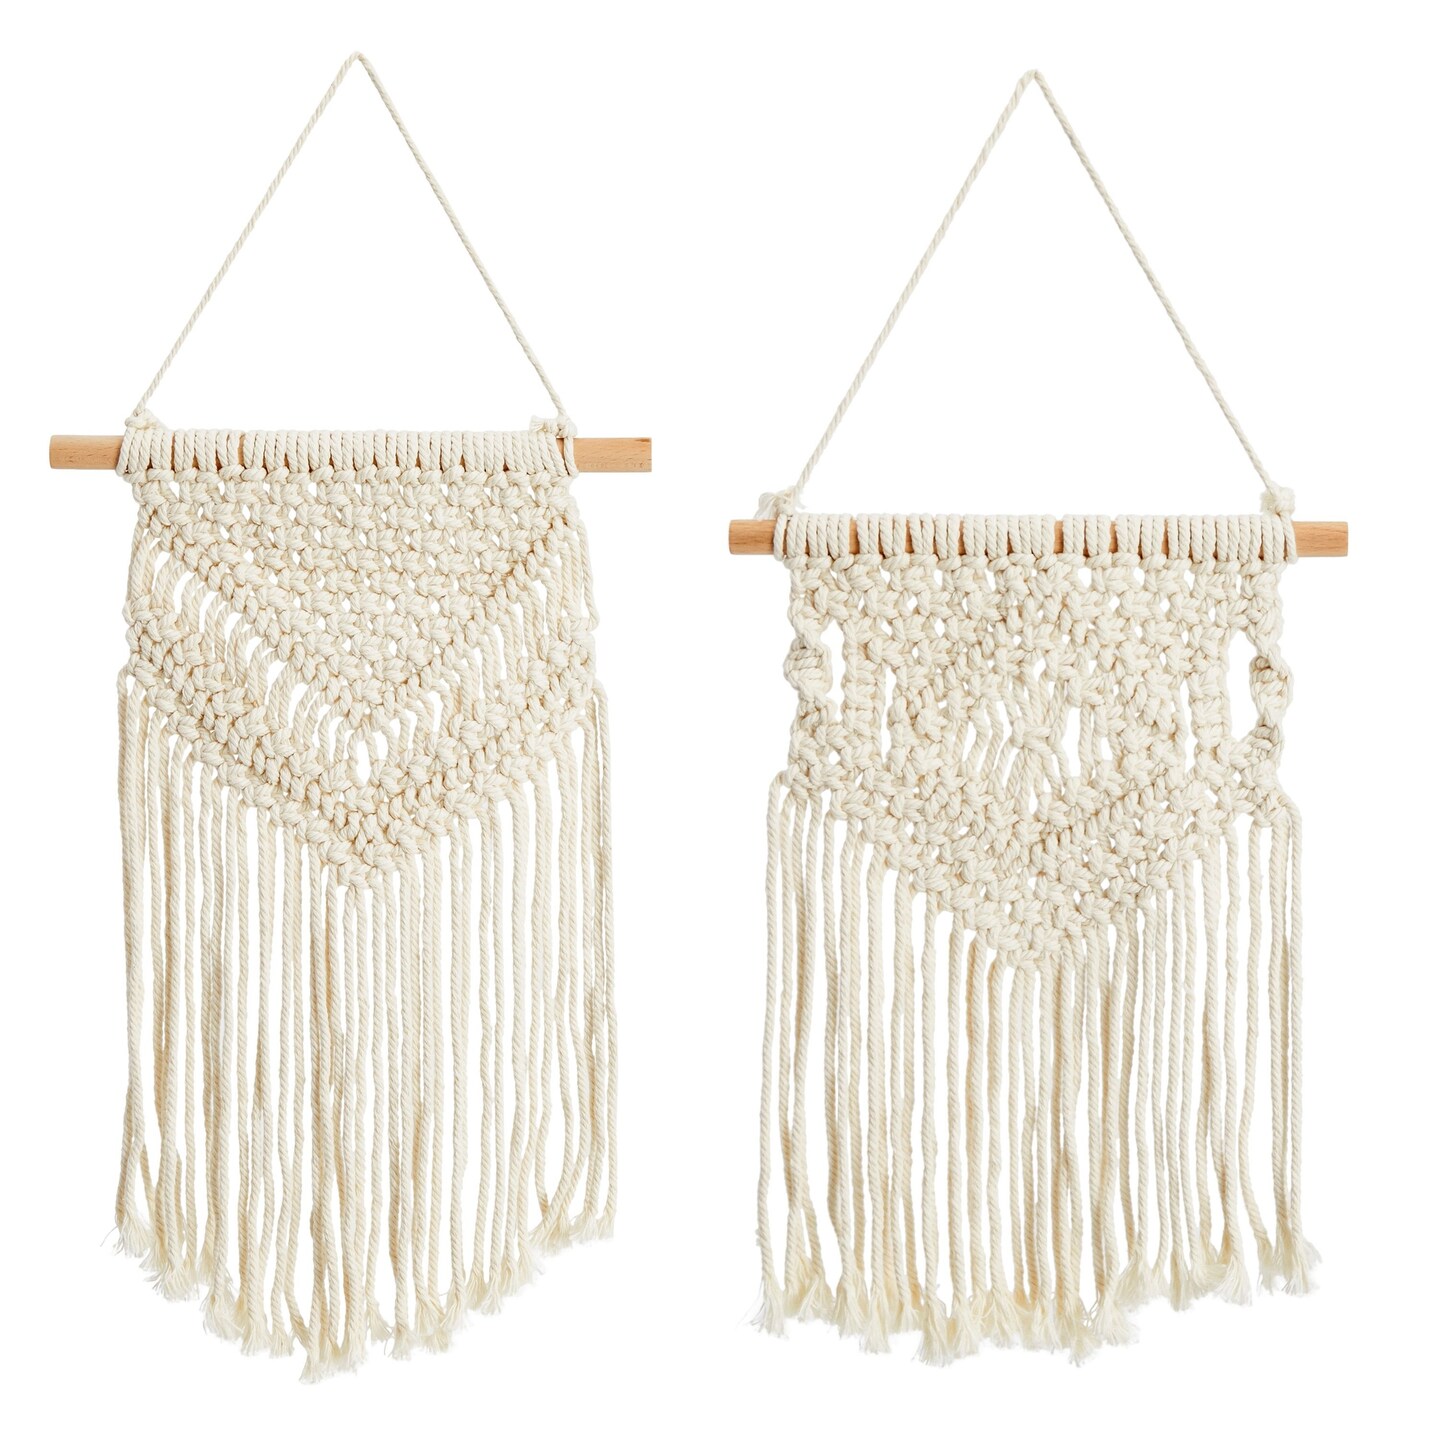 2 Pack Bohemian Style Macrame Wall Hanging, Dreamcatcher Home Decor (White, 10 x 15 In)